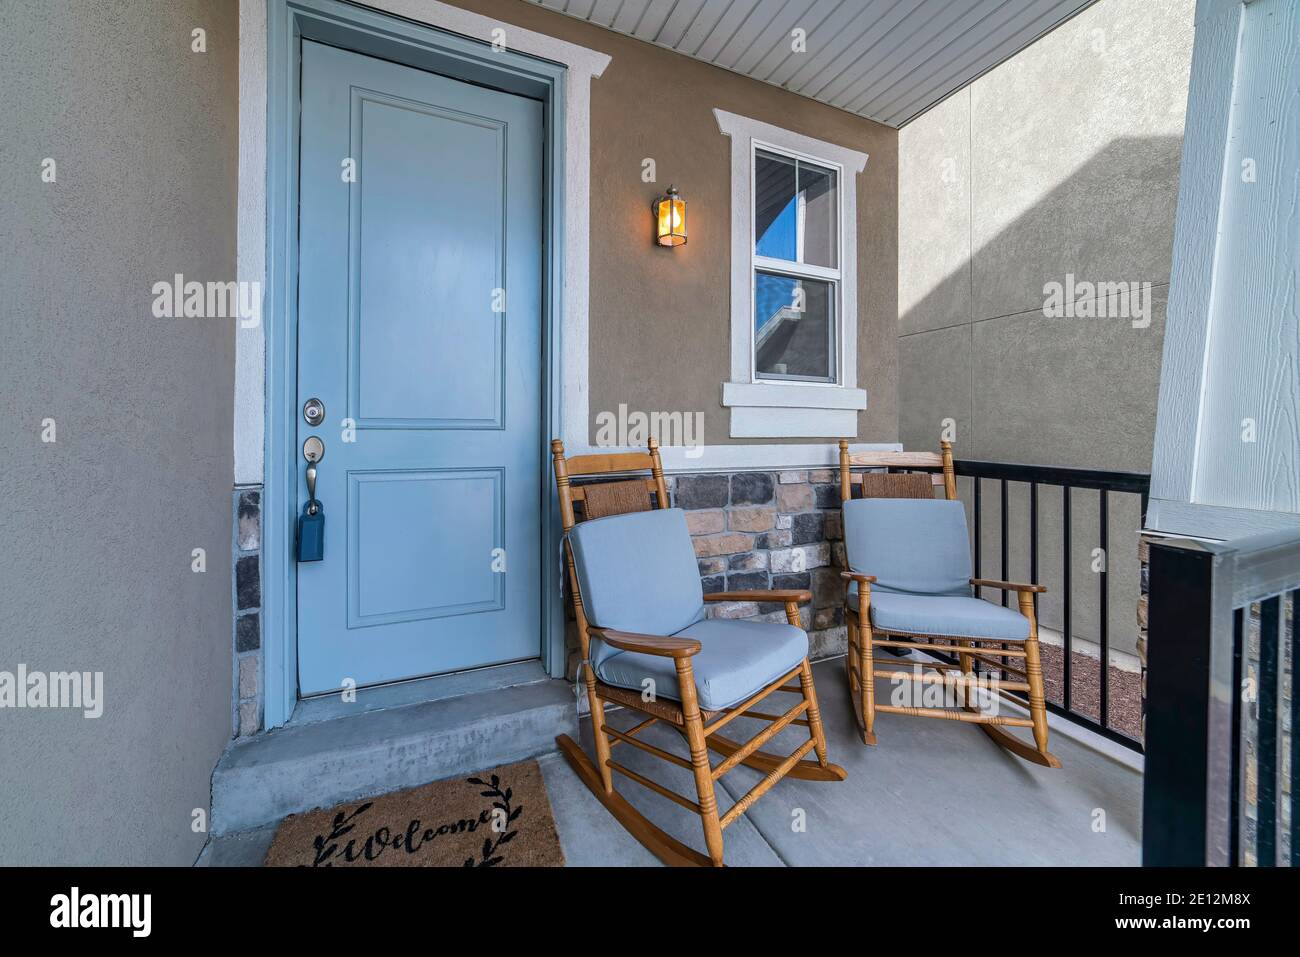 Rocking chairs on the small porch against white front door and window of house Stock Photo